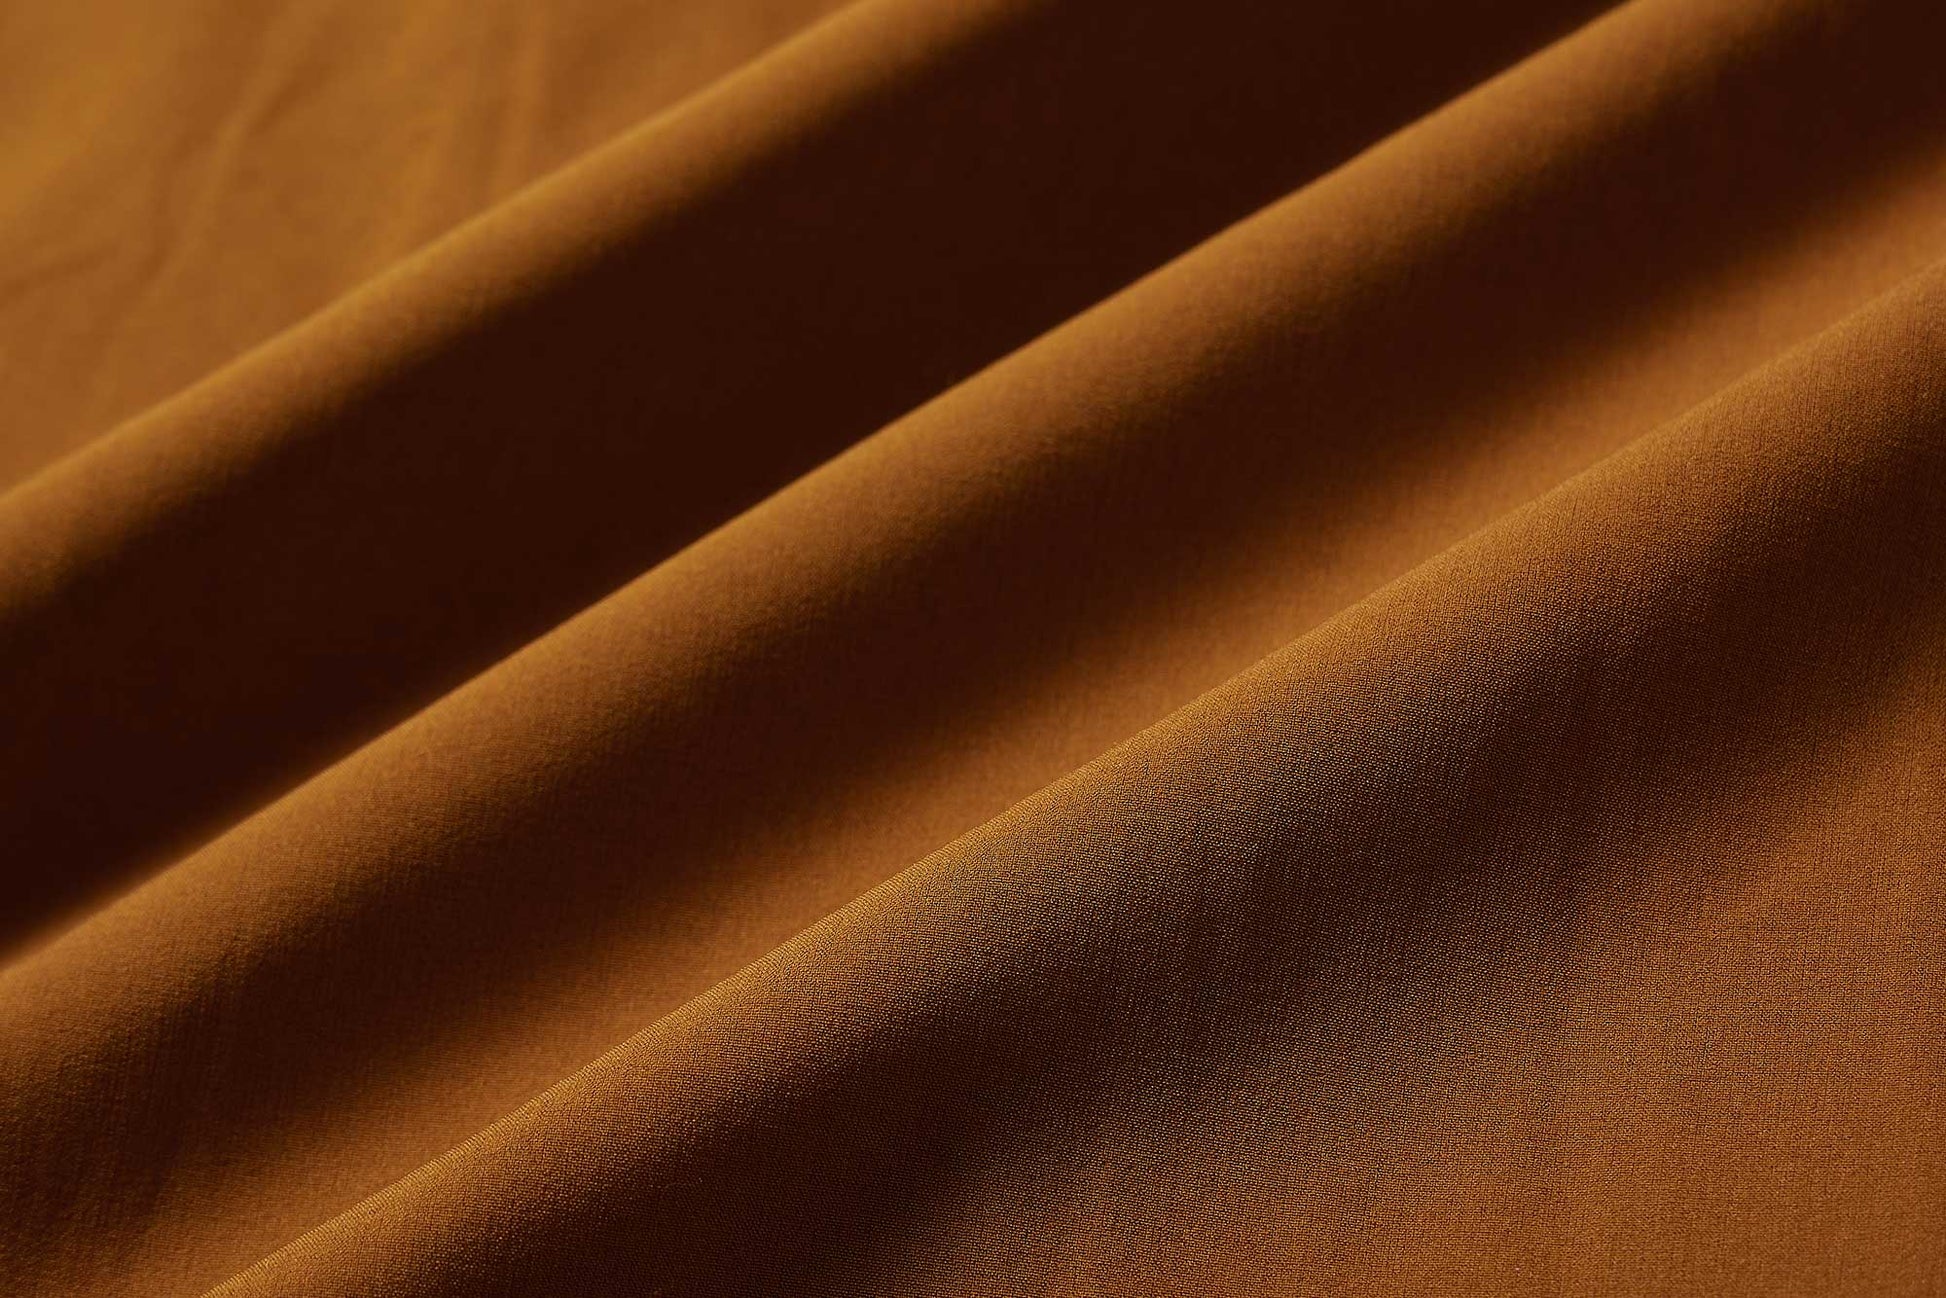 Fabric details of brown culottes